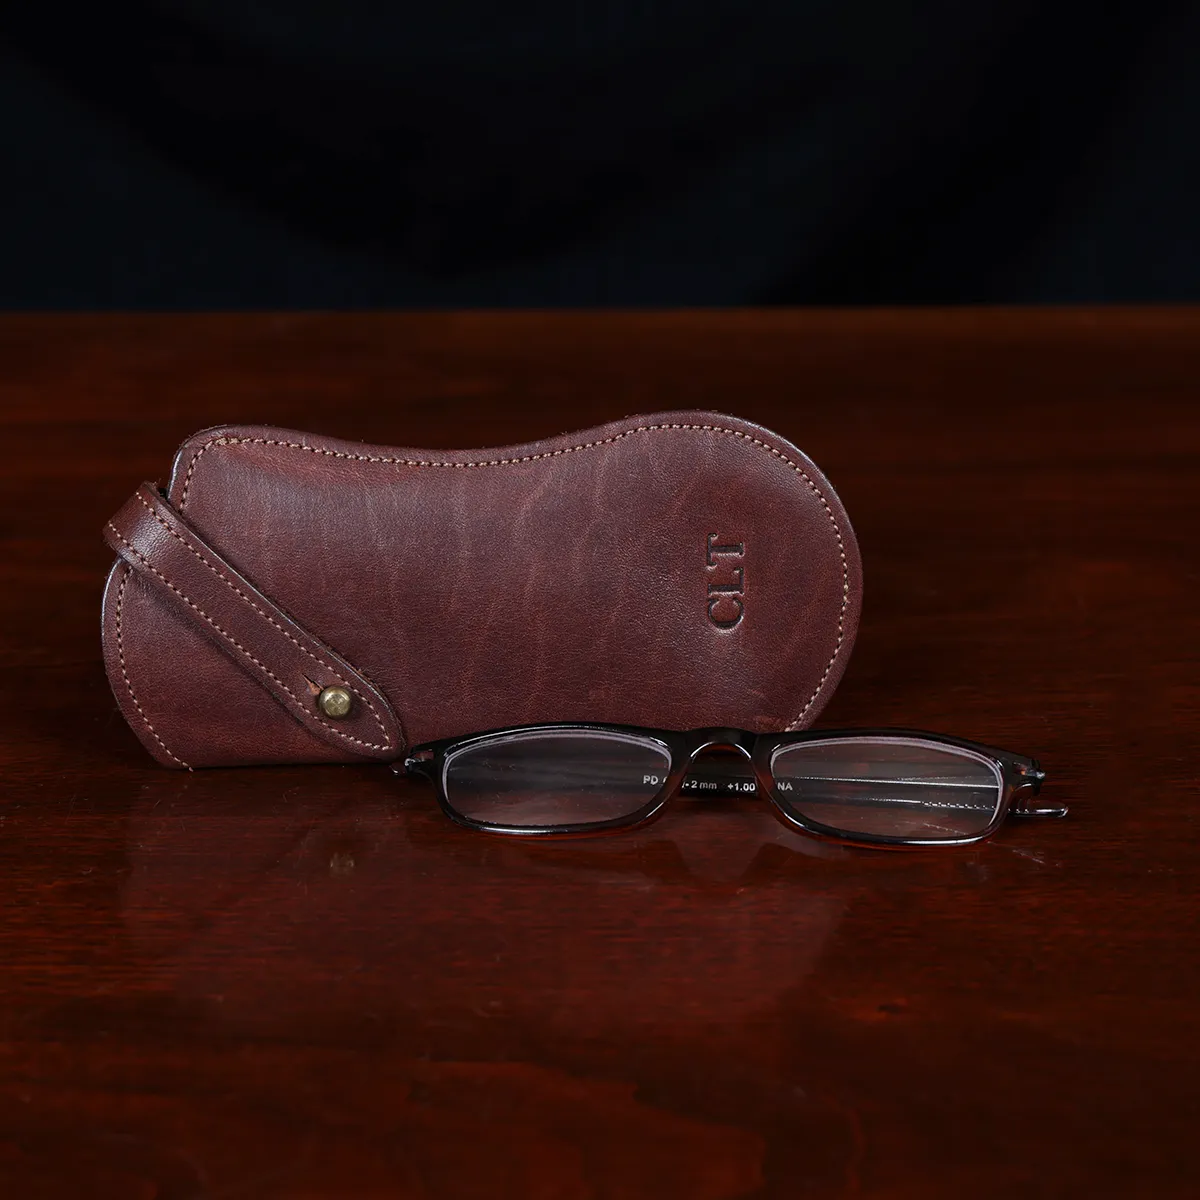 Brown leather No. 2 Eyeglass Case on top of a wooden table with a dark background with glasses